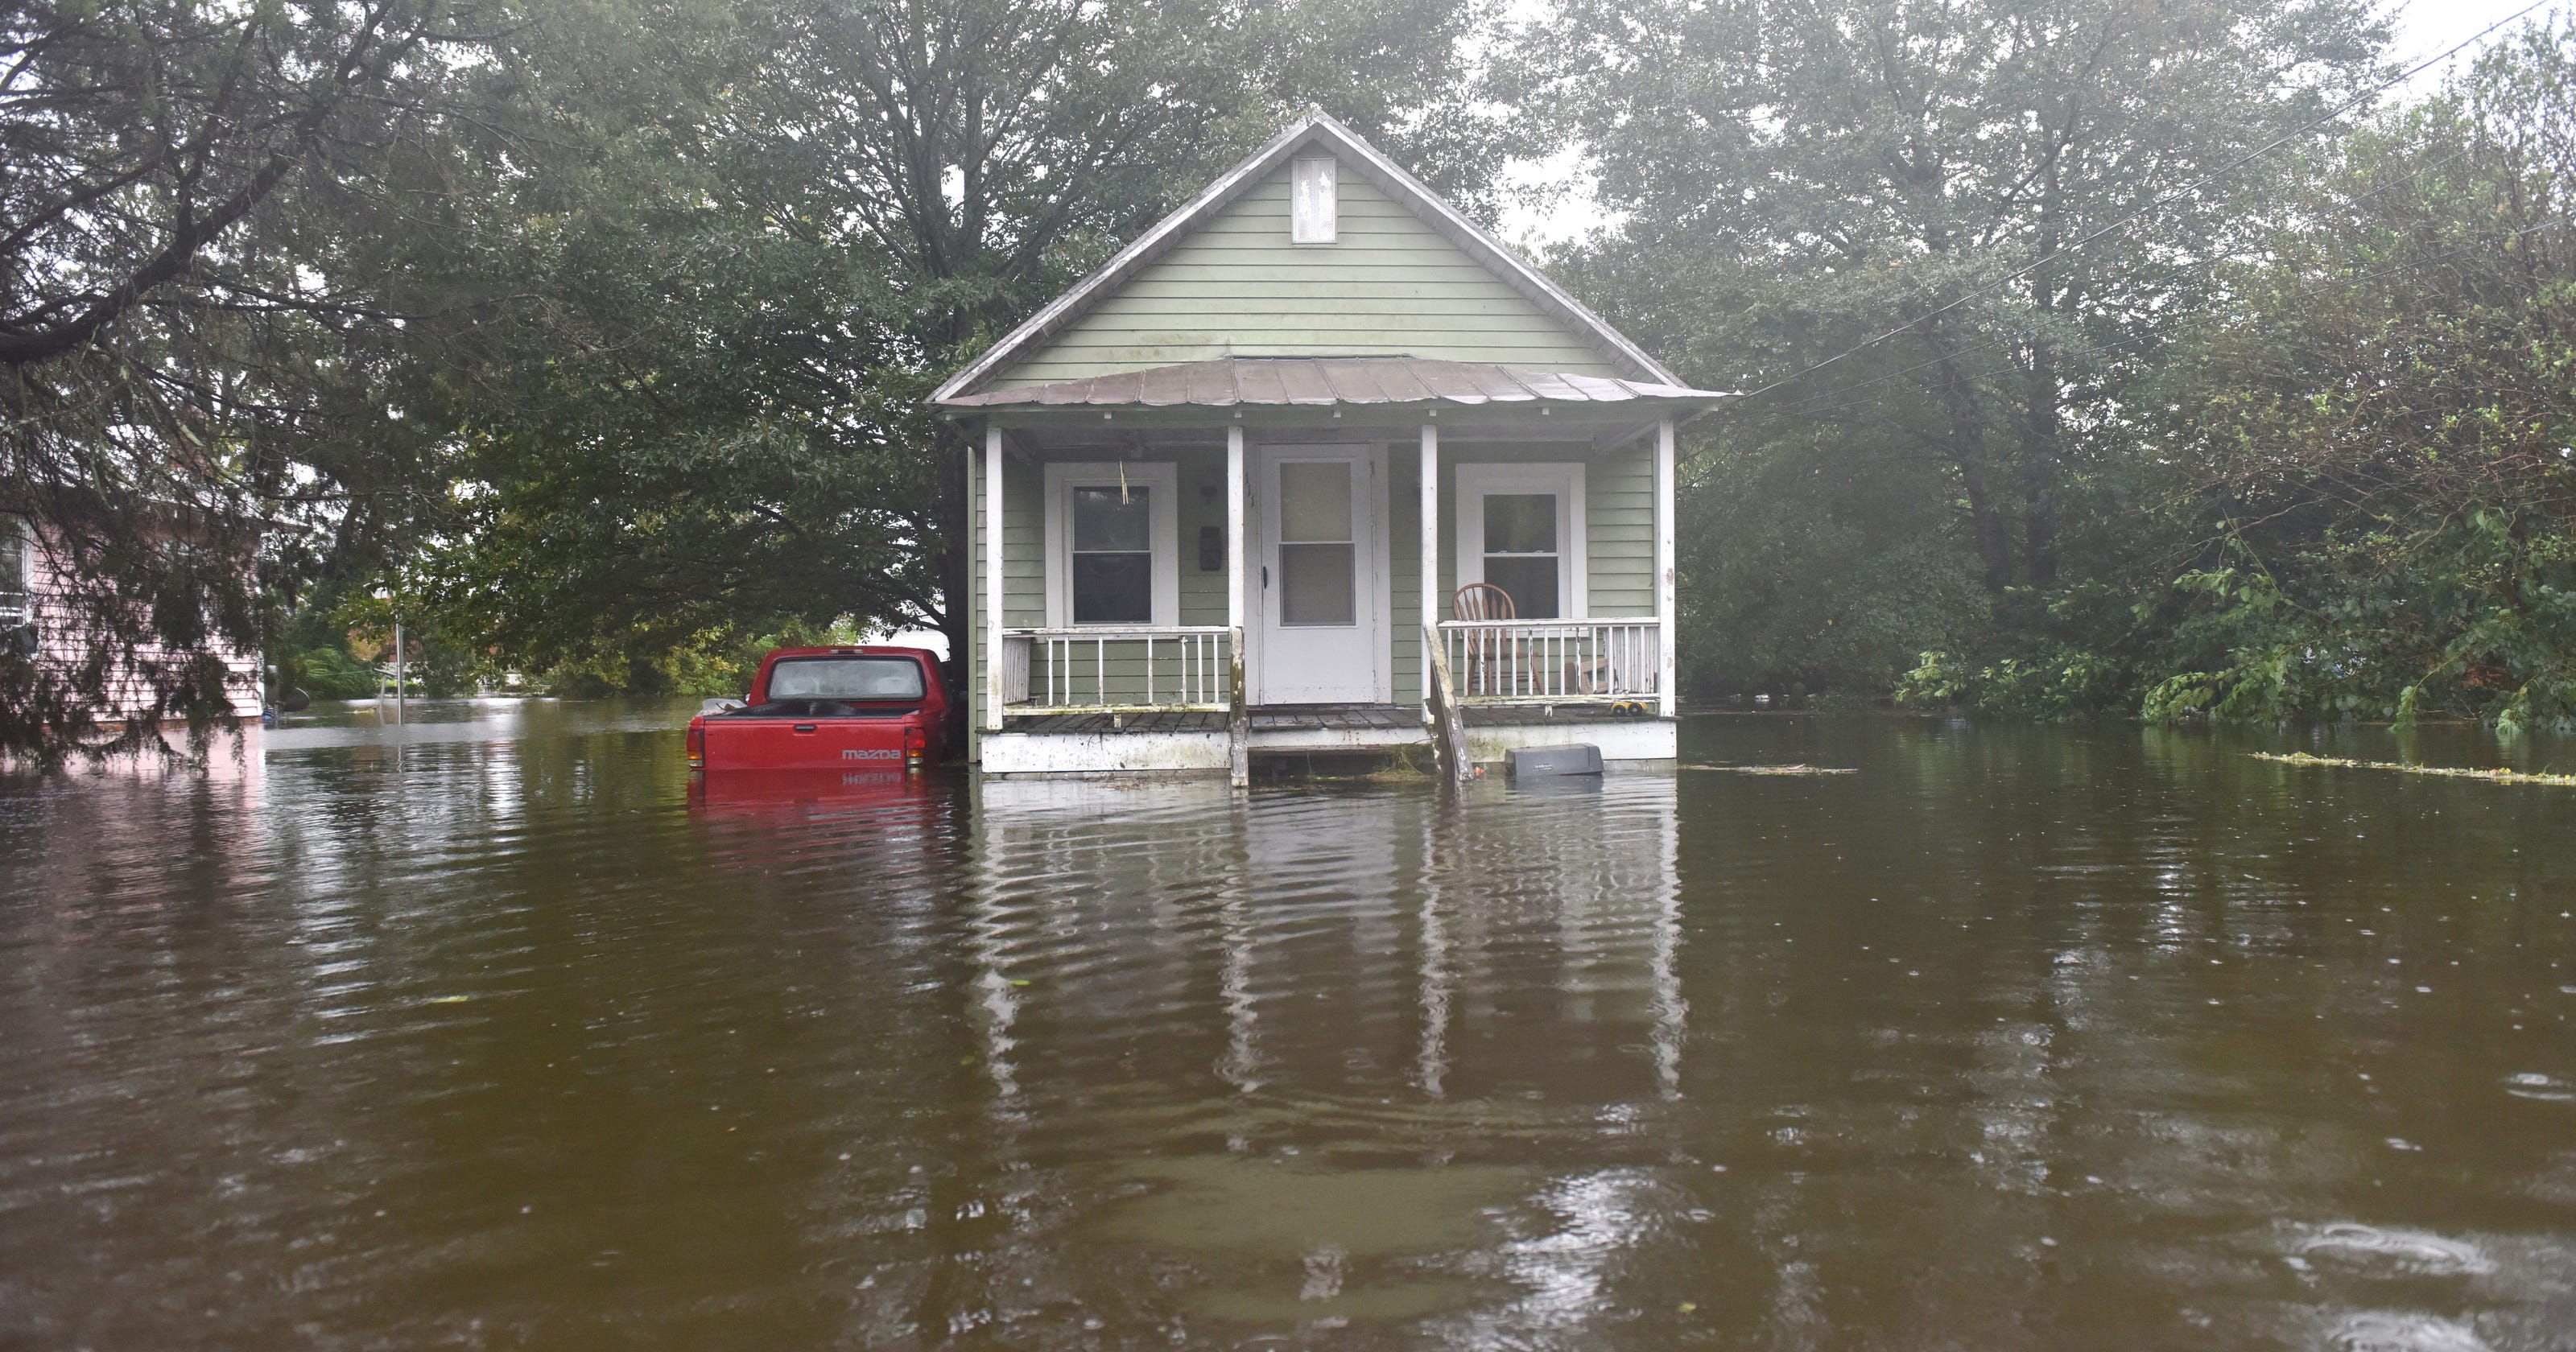 Do you have to declare flooding when selling a house?